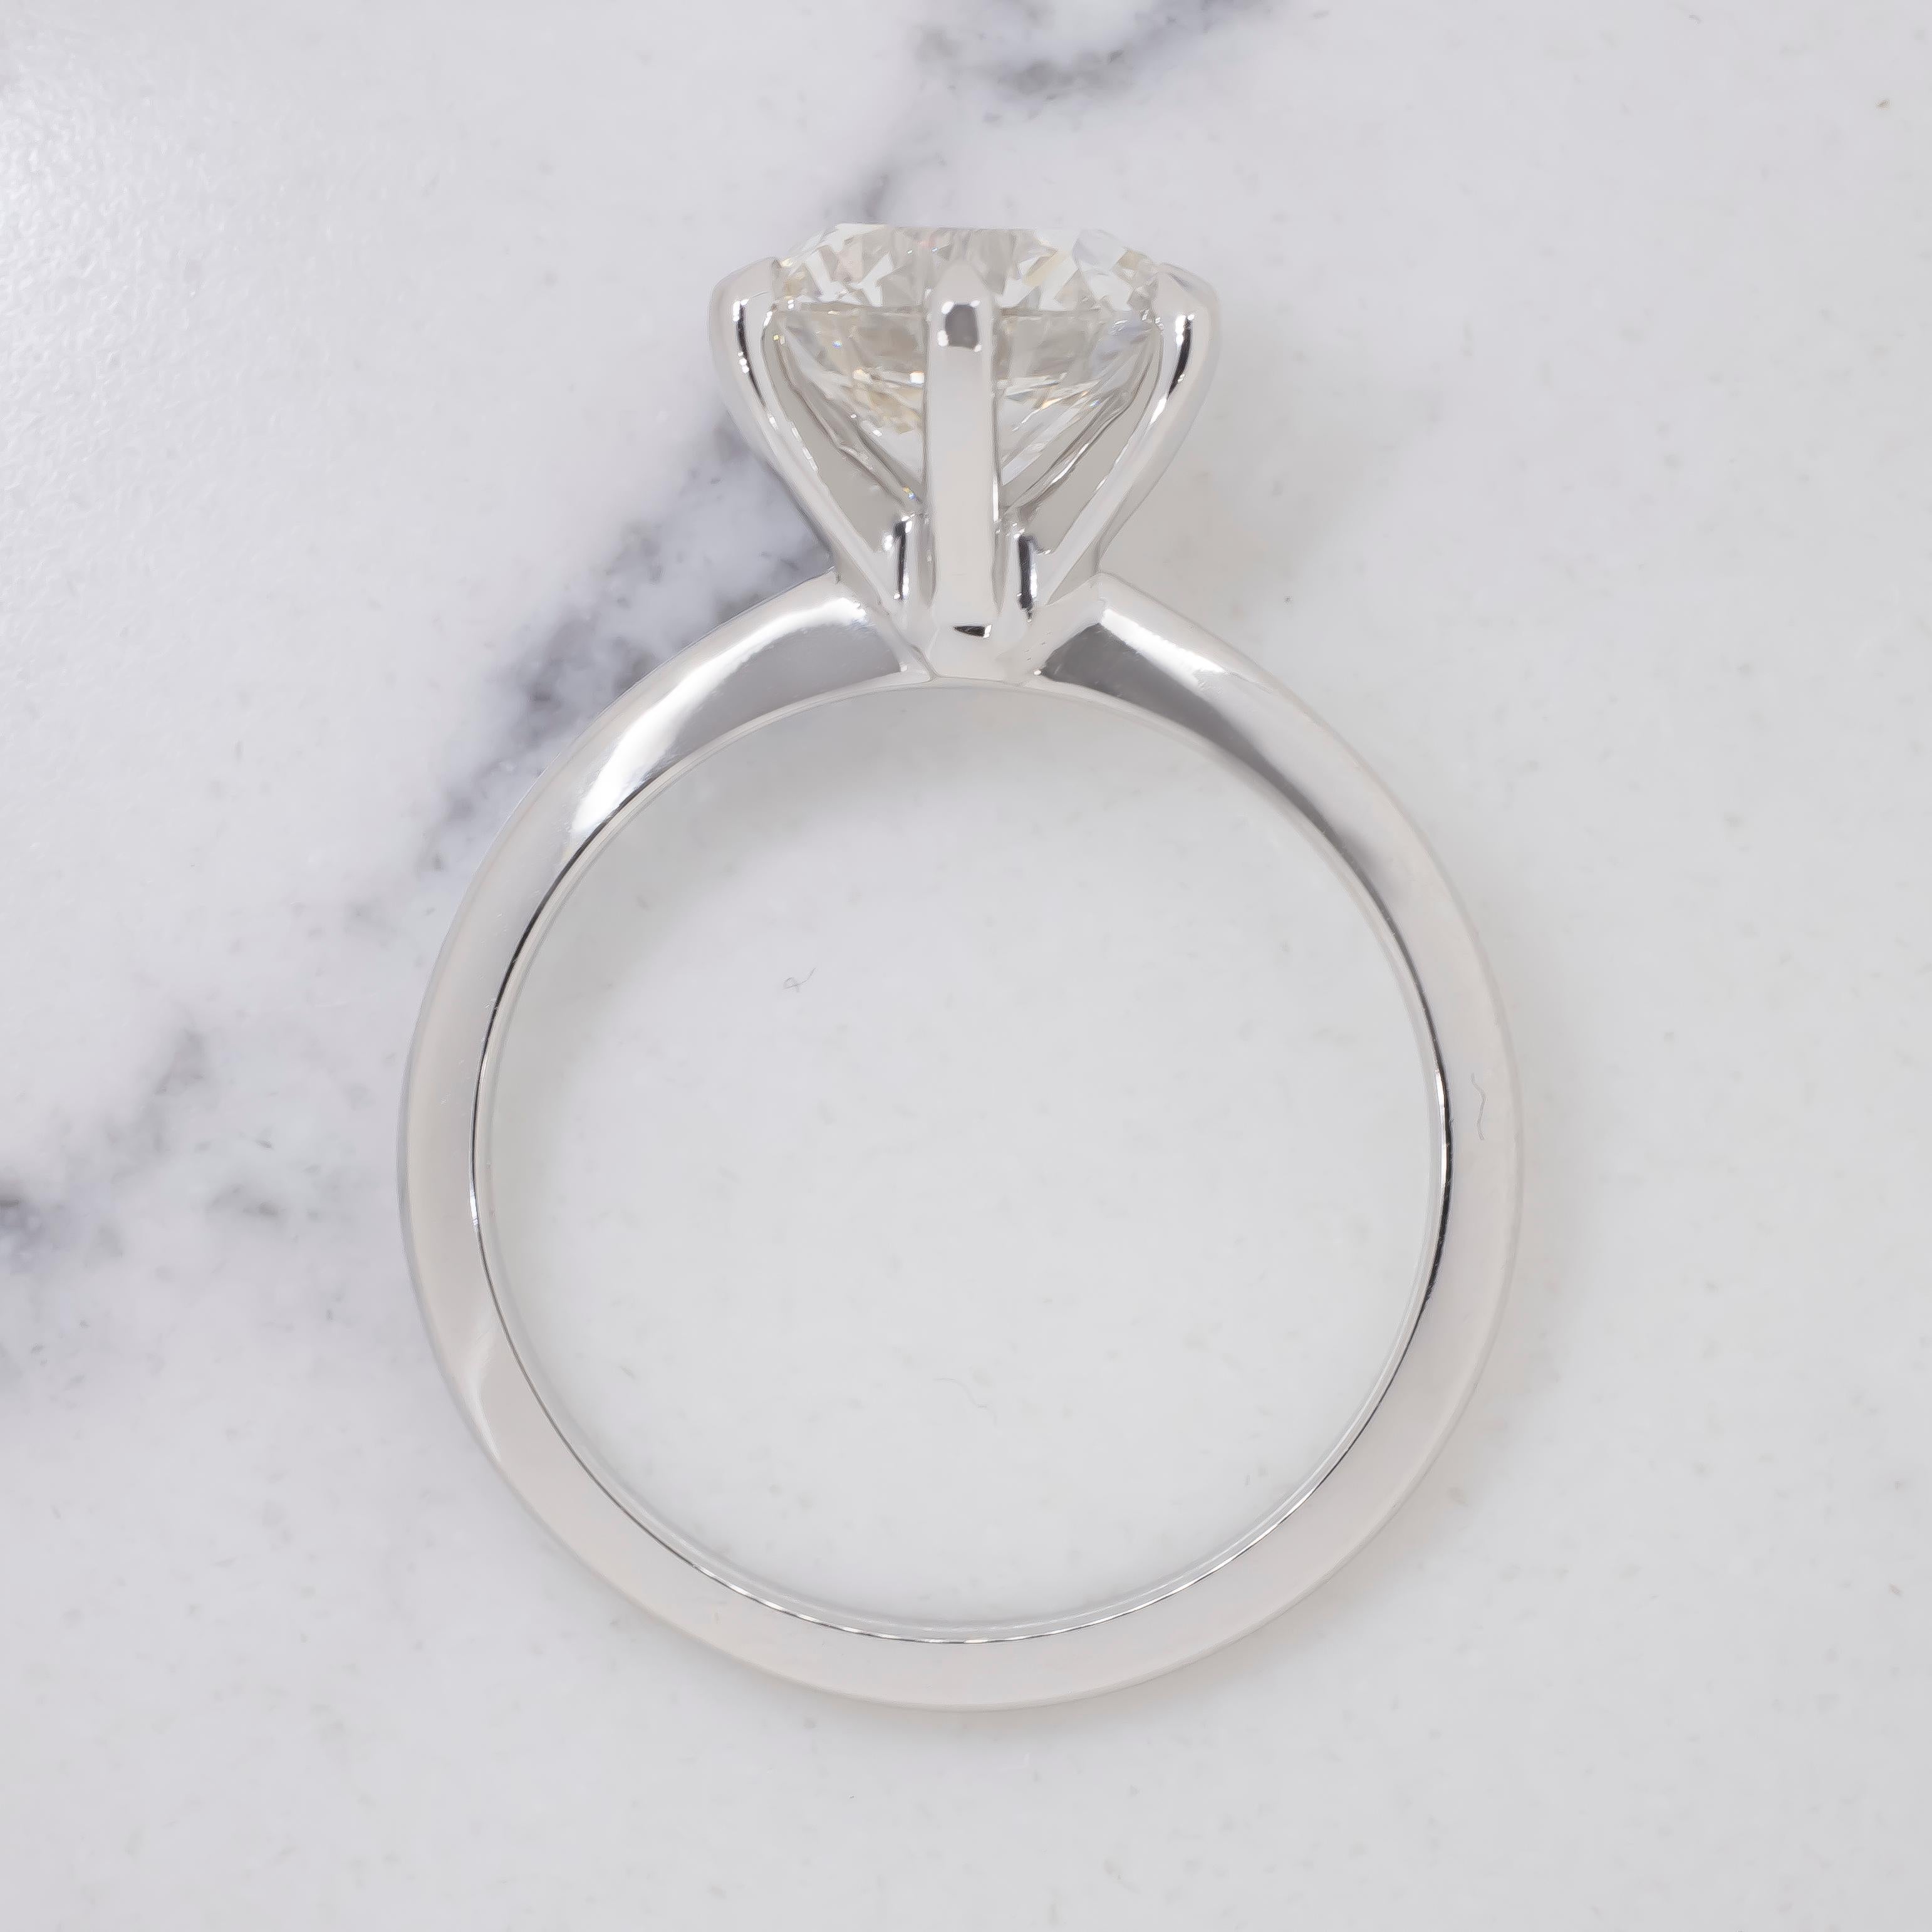 Elegant Platinum Solitaire Engagement Ring with a 2.23 Carat Round Brilliant Diamond by Antinori Di Sanpietro

Antinori Di Sanpietro is delighted to unveil this timeless platinum solitaire engagement ring, a testament to enduring love and impeccable